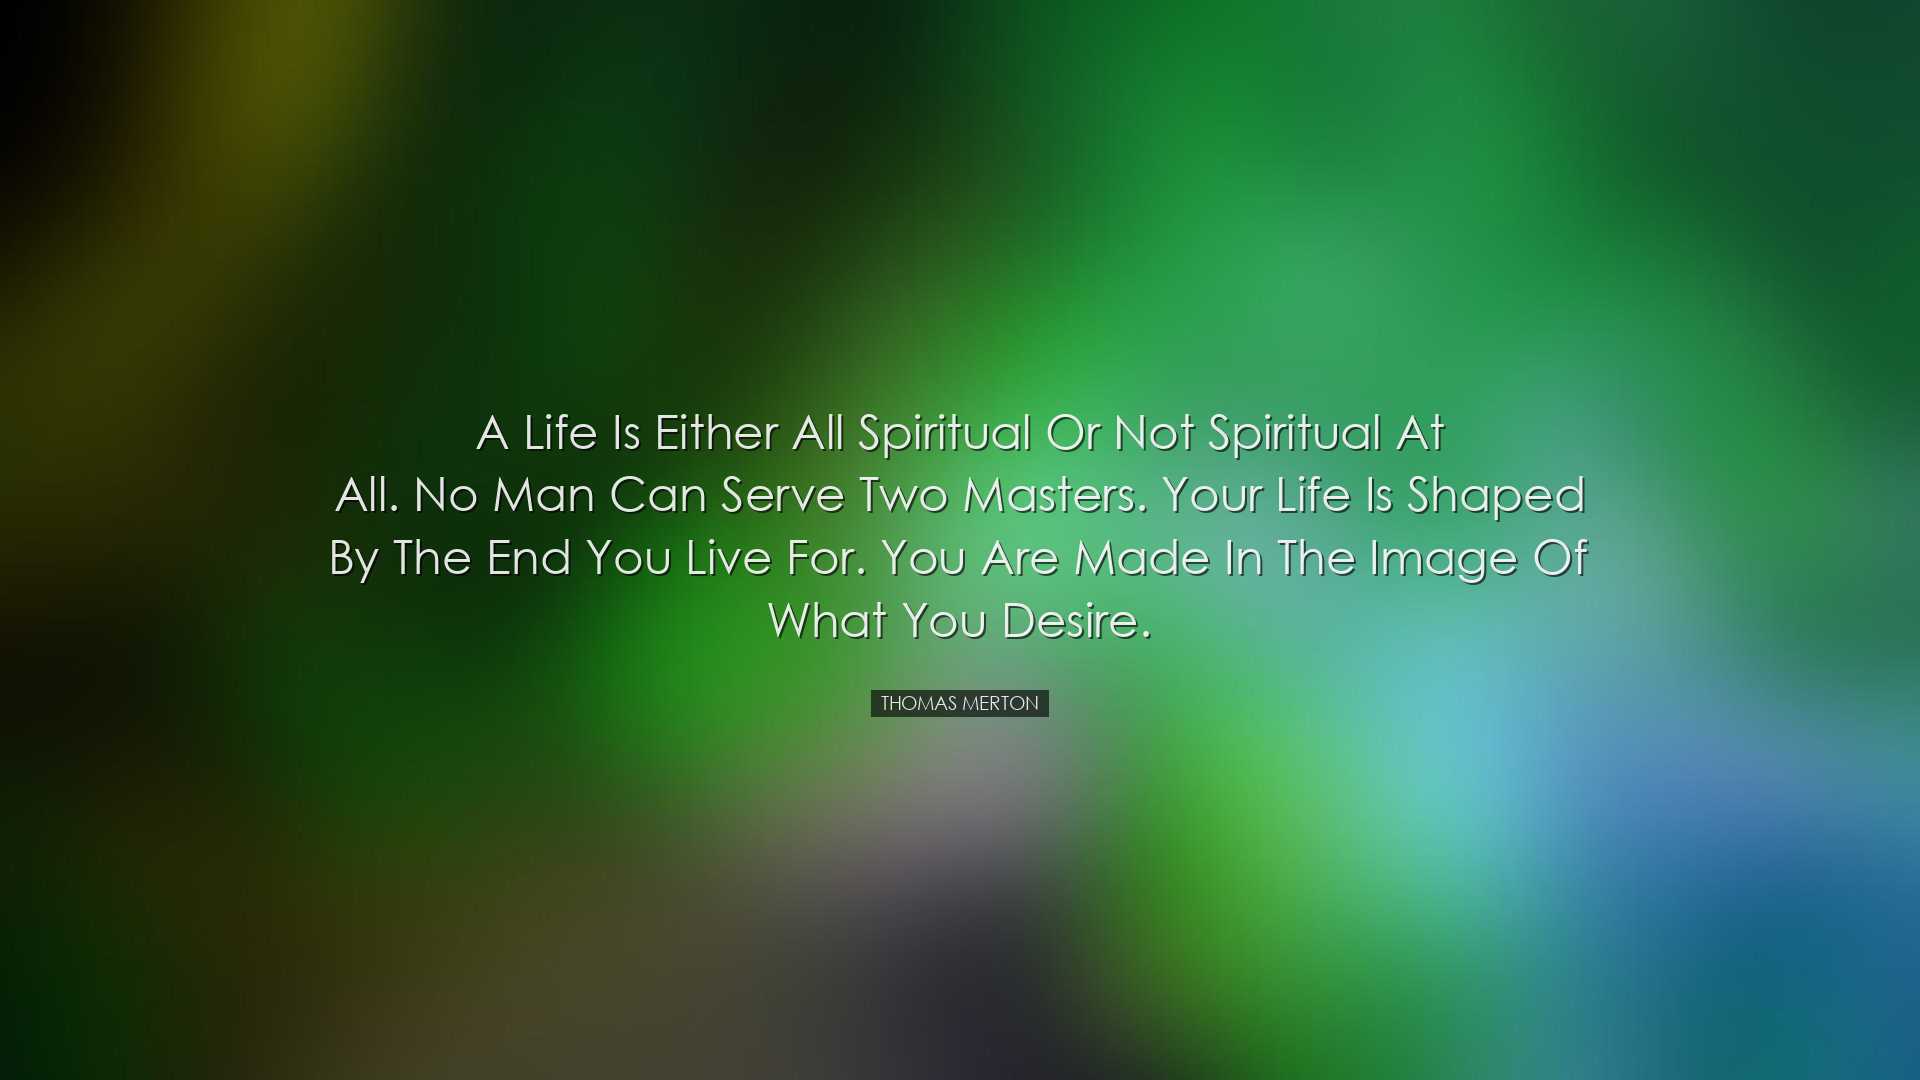 A life is either all spiritual or not spiritual at all. No man can